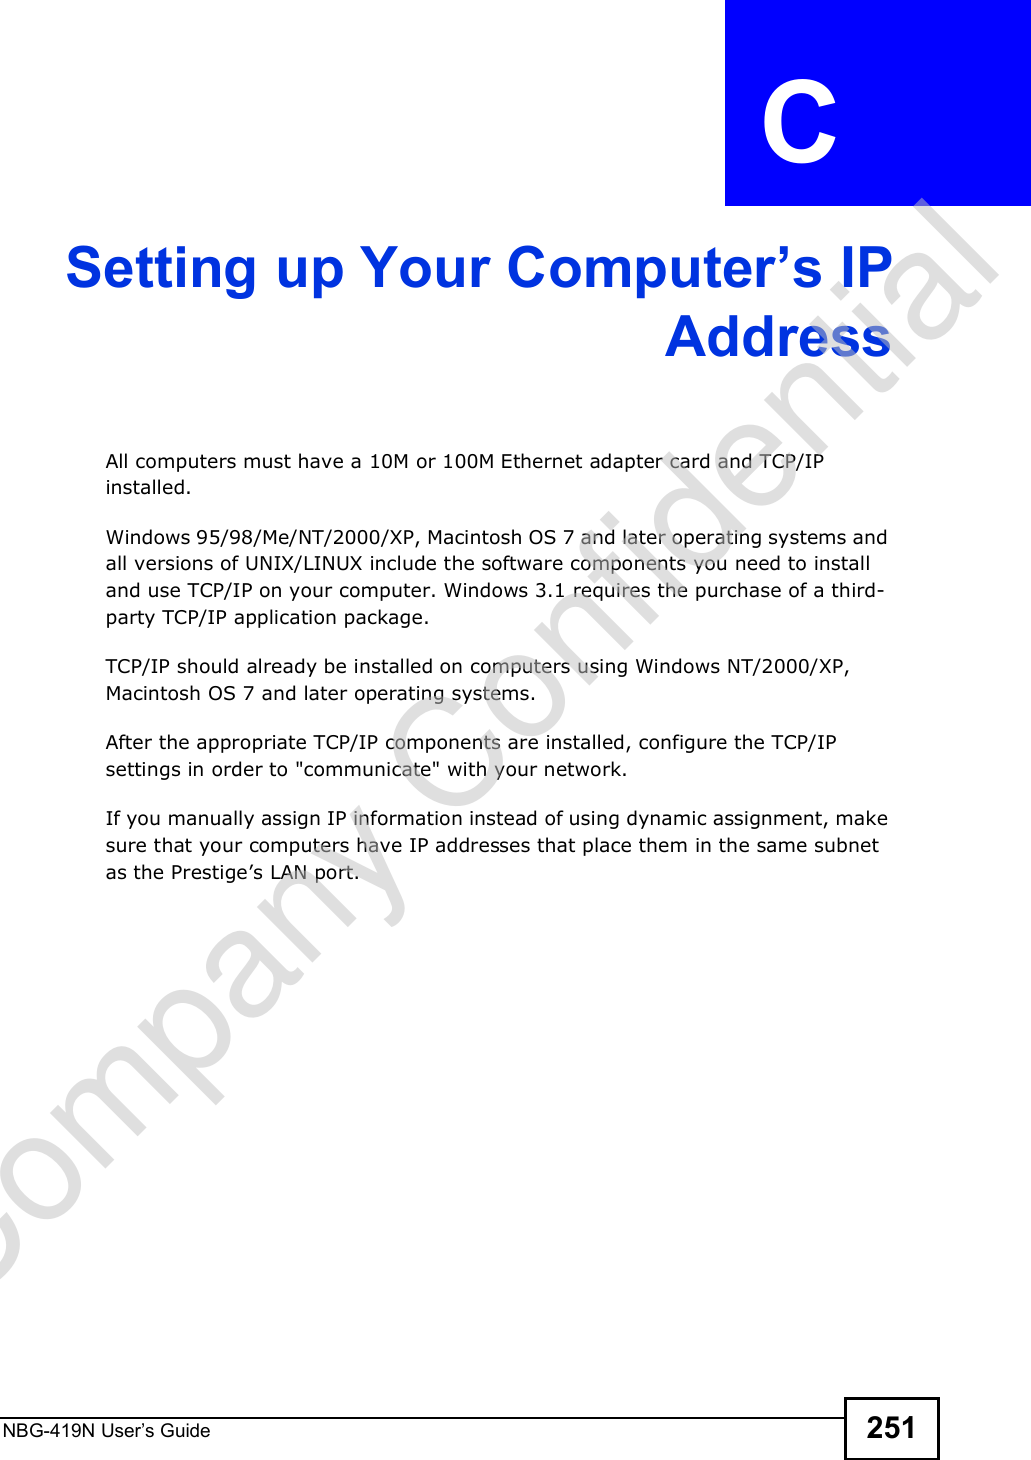 NBG-419N User s Guide 251APPENDIX  C Setting up Your Computer#s IPAddressAll computers must have a 10M or 100M Ethernet adapter card and TCP/IP installed. Windows 95/98/Me/NT/2000/XP, Macintosh OS 7 and later operating systems and all versions of UNIX/LINUX include the software components you need to install and use TCP/IP on your computer. Windows 3.1 requires the purchase of a third-party TCP/IP application package.TCP/IP should already be installed on computers using Windows NT/2000/XP, Macintosh OS 7 and later operating systems.After the appropriate TCP/IP components are installed, configure the TCP/IP settings in order to &quot;communicate&quot; with your network. If you manually assign IP information instead of using dynamic assignment, make sure that your computers have IP addresses that place them in the same subnet as the Prestige!s LAN port.Company Confidential